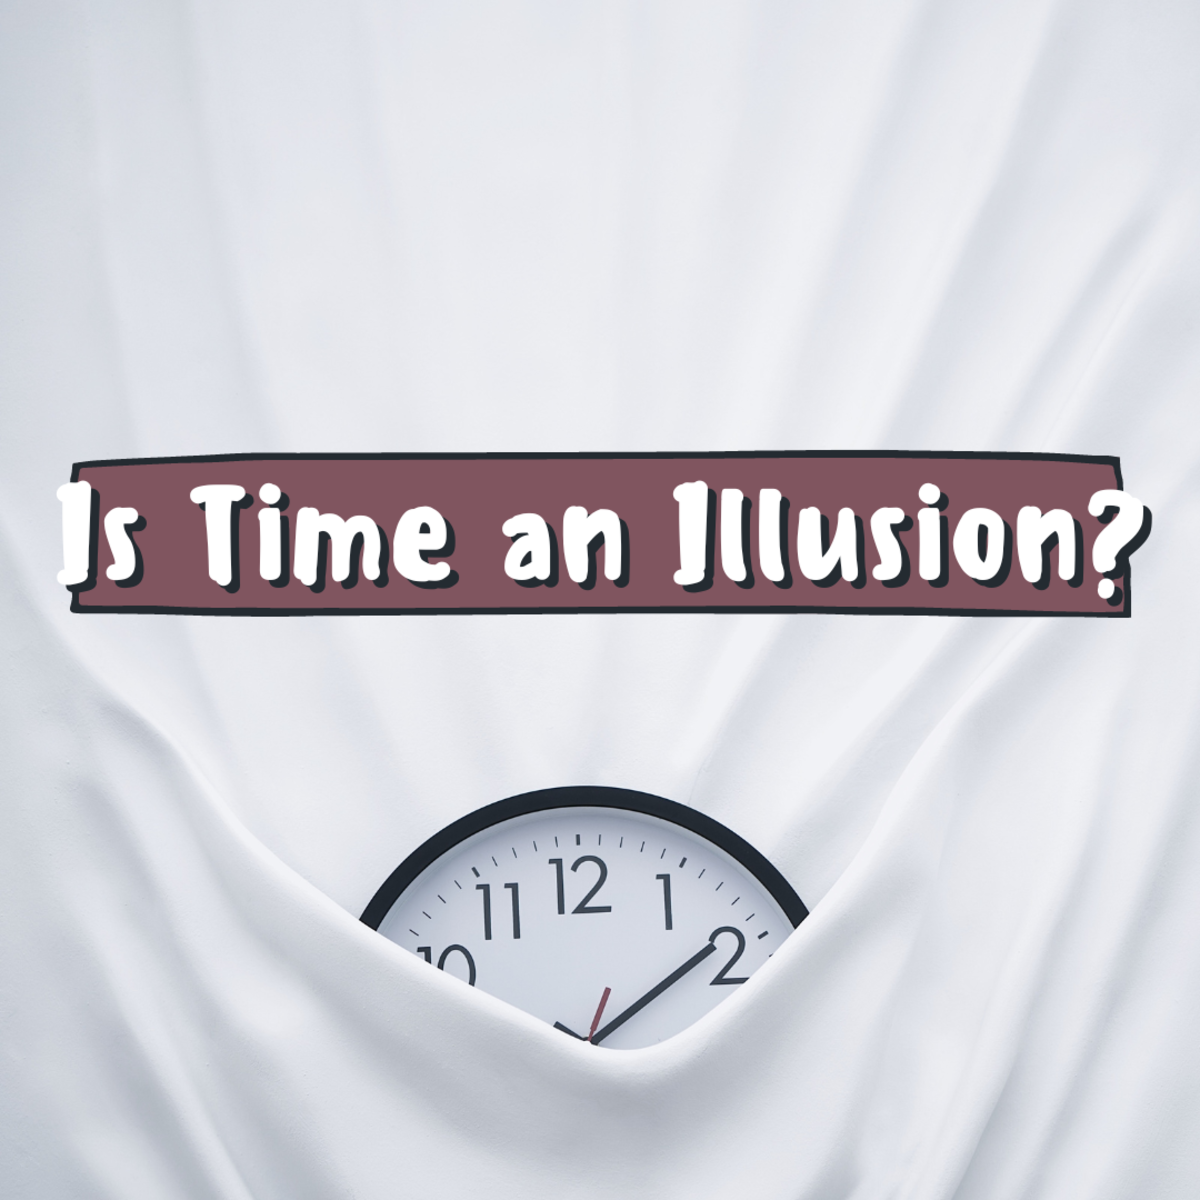 Is Time an Illusion?